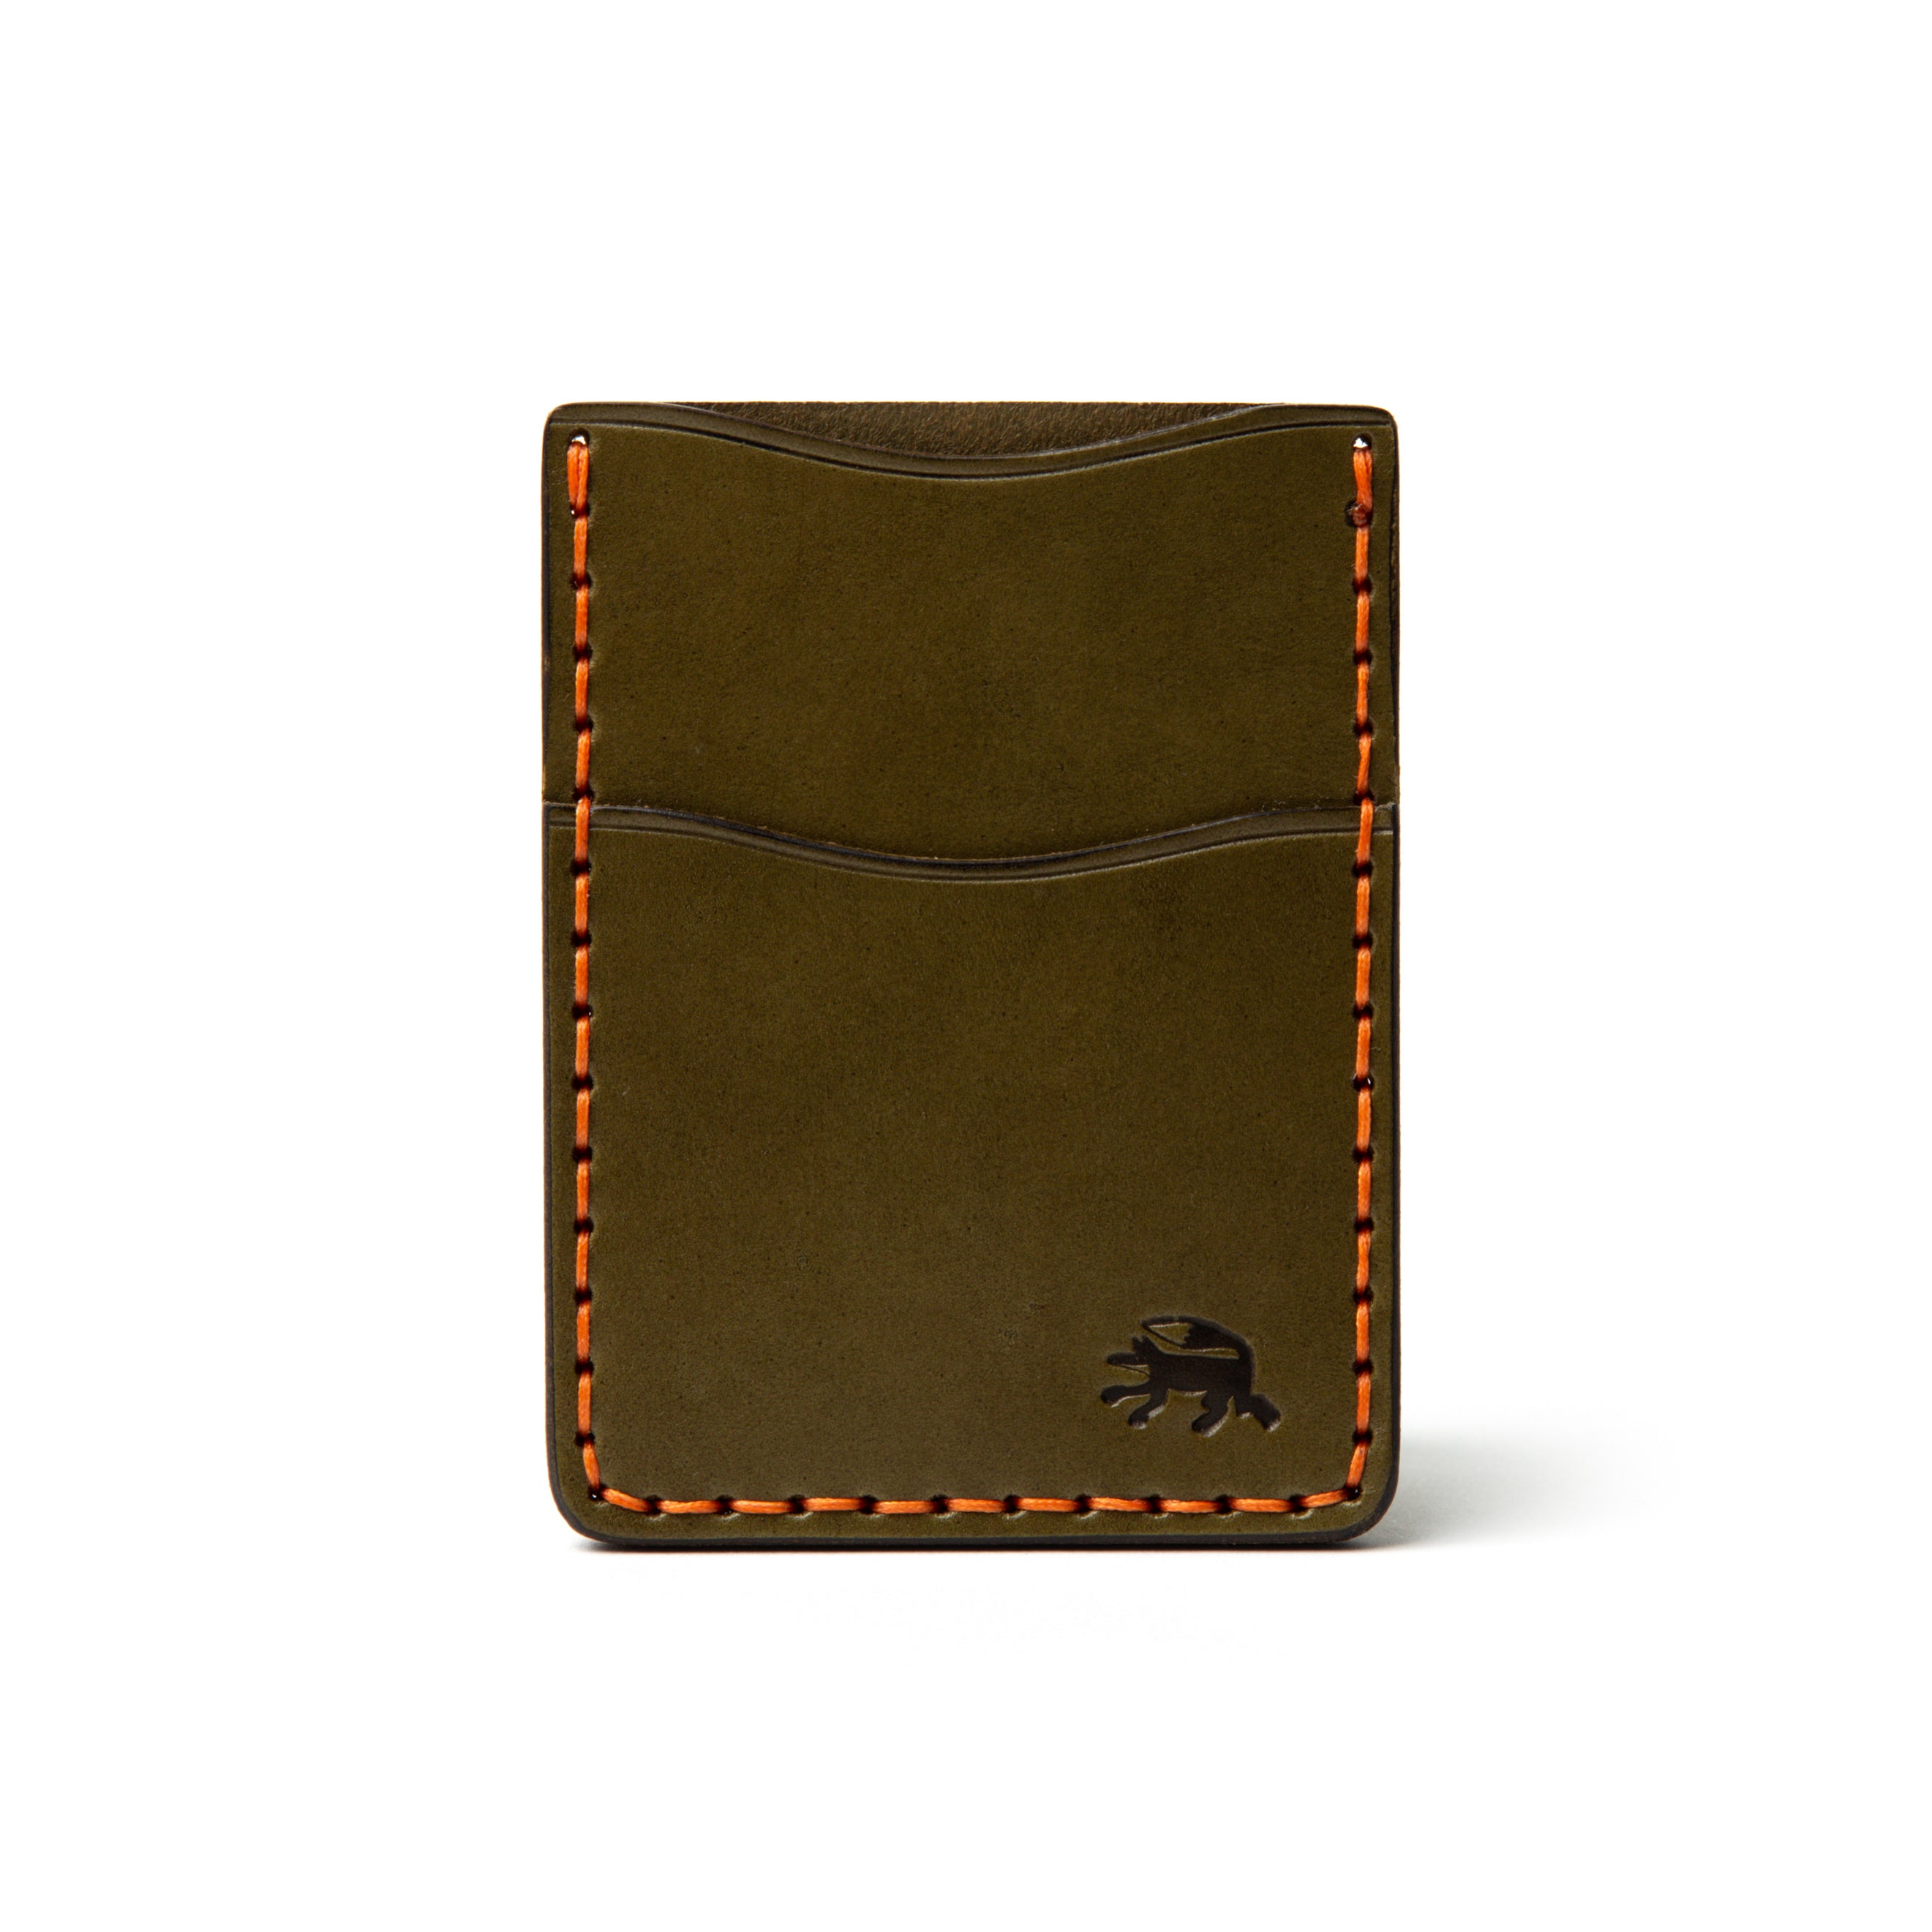 Hand Stitched Money Clip Wallet - Olive